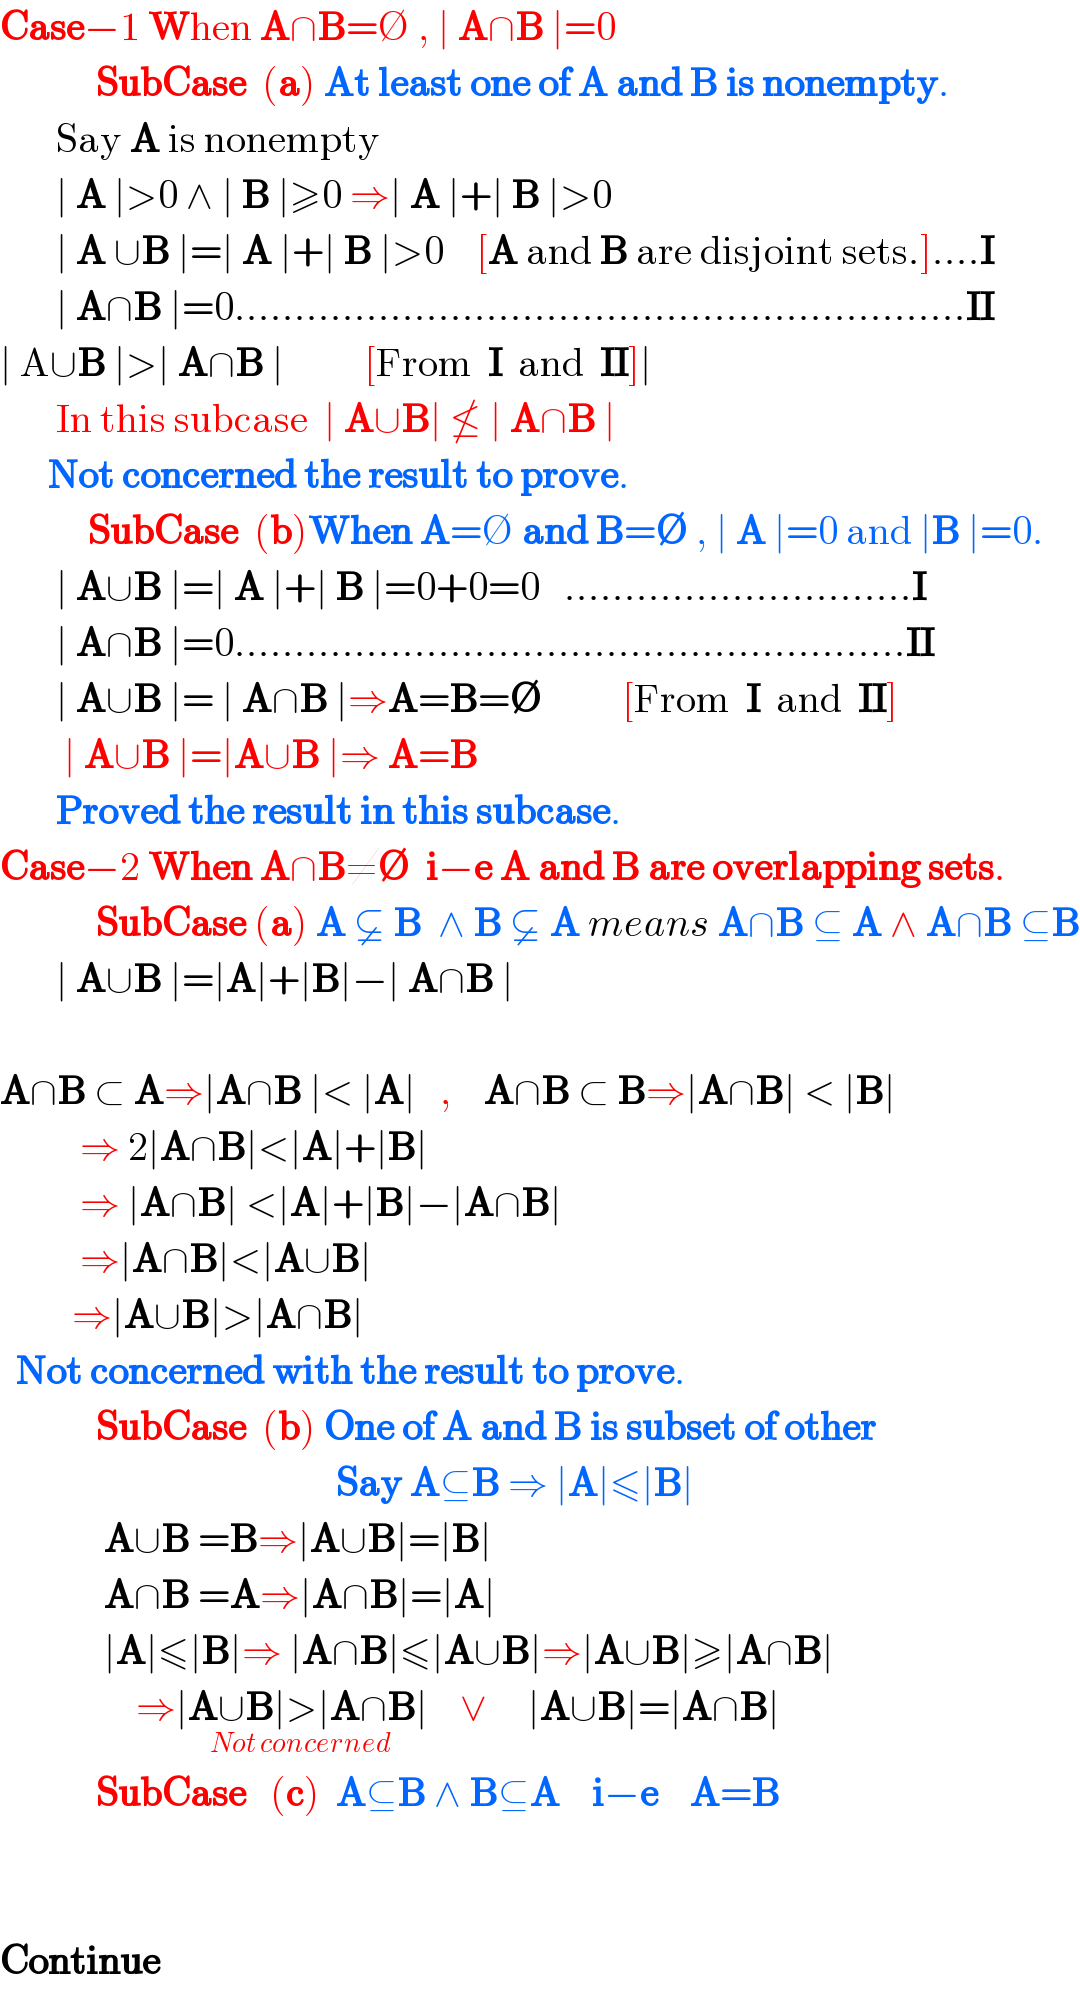 Case−1 When A∩B=∅ , ∣ A∩B ∣=0              SubCase  (a) At least one of A and B is nonempty.         Say A is nonempty         ∣ A ∣>0 ∧ ∣ B ∣≥0 ⇒∣ A ∣+∣ B ∣>0         ∣ A ∪B ∣=∣ A ∣+∣ B ∣>0    [A and B are disjoint sets.]....I         ∣ A∩B ∣=0.............................................................II  ∣ A∪B ∣>∣ A∩B ∣          [From  I  and  II]∣         In this subcase  ∣ A∪B∣ ≰ ∣ A∩B ∣        Not concerned the result to prove.             SubCase  (b)When A=∅ and B=∅ , ∣ A ∣=0 and ∣B ∣=0.         ∣ A∪B ∣=∣ A ∣+∣ B ∣=0+0=0   .............................I         ∣ A∩B ∣=0........................................................II         ∣ A∪B ∣= ∣ A∩B ∣⇒A=B=∅          [From  I  and  II]          ∣ A∪B ∣=∣A∪B ∣⇒ A=B         Proved the result in this subcase.  Case−2 When A∩B≠∅  i−e A and B are overlapping sets.              SubCase (a) A  B  ∧ B  A means A∩B ⊆ A ∧ A∩B ⊆B         ∣ A∪B ∣=∣A∣+∣B∣−∣ A∩B ∣         A∩B ⊂ A⇒∣A∩B ∣< ∣A∣   ,    A∩B ⊂ B⇒∣A∩B∣ < ∣B∣            ⇒ 2∣A∩B∣<∣A∣+∣B∣            ⇒ ∣A∩B∣ <∣A∣+∣B∣−∣A∩B∣            ⇒∣A∩B∣<∣A∪B∣           ⇒∣A∪B∣>∣A∩B∣    Not concerned with the result to prove.              SubCase  (b) One of A and B is subset of other                                            Say A⊆B ⇒ ∣A∣≤∣B∣               A∪B =B⇒∣A∪B∣=∣B∣               A∩B =A⇒∣A∩B∣=∣A∣               ∣A∣≤∣B∣⇒ ∣A∩B∣≤∣A∪B∣⇒∣A∪B∣≥∣A∩B∣                   ⇒∣A∪B∣>∣A∩B∣_(Not concerned)     ∨     ∣A∪B∣=∣A∩B∣              SubCase   (c)  A⊆B ∧ B⊆A    i−e    A=B                                Continue  